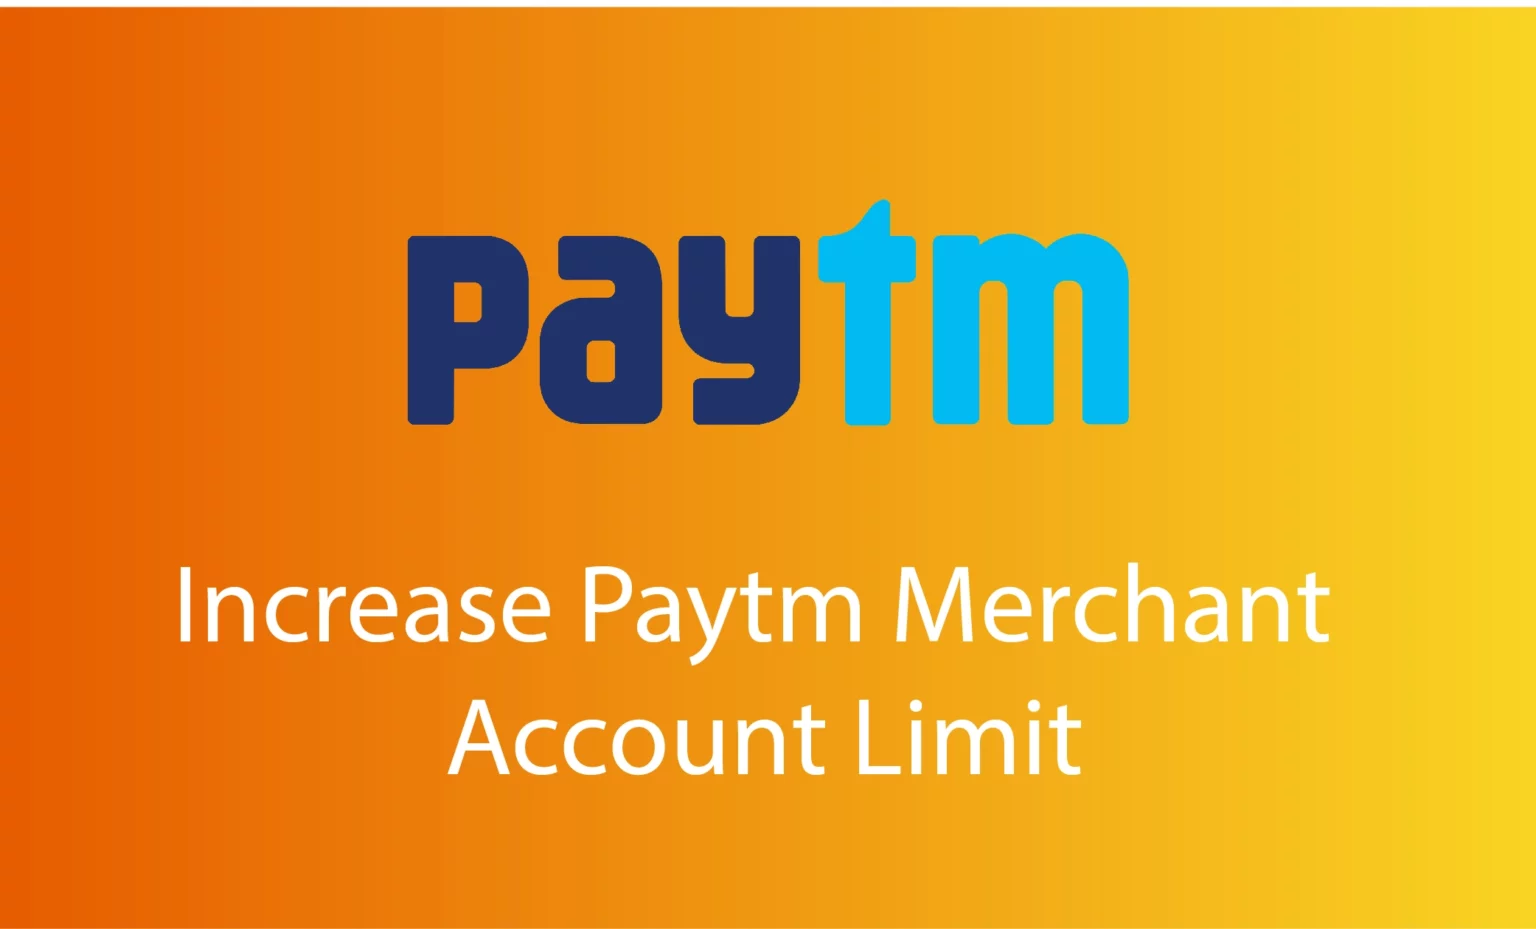 How to Increase Paytm Merchant Account Limit